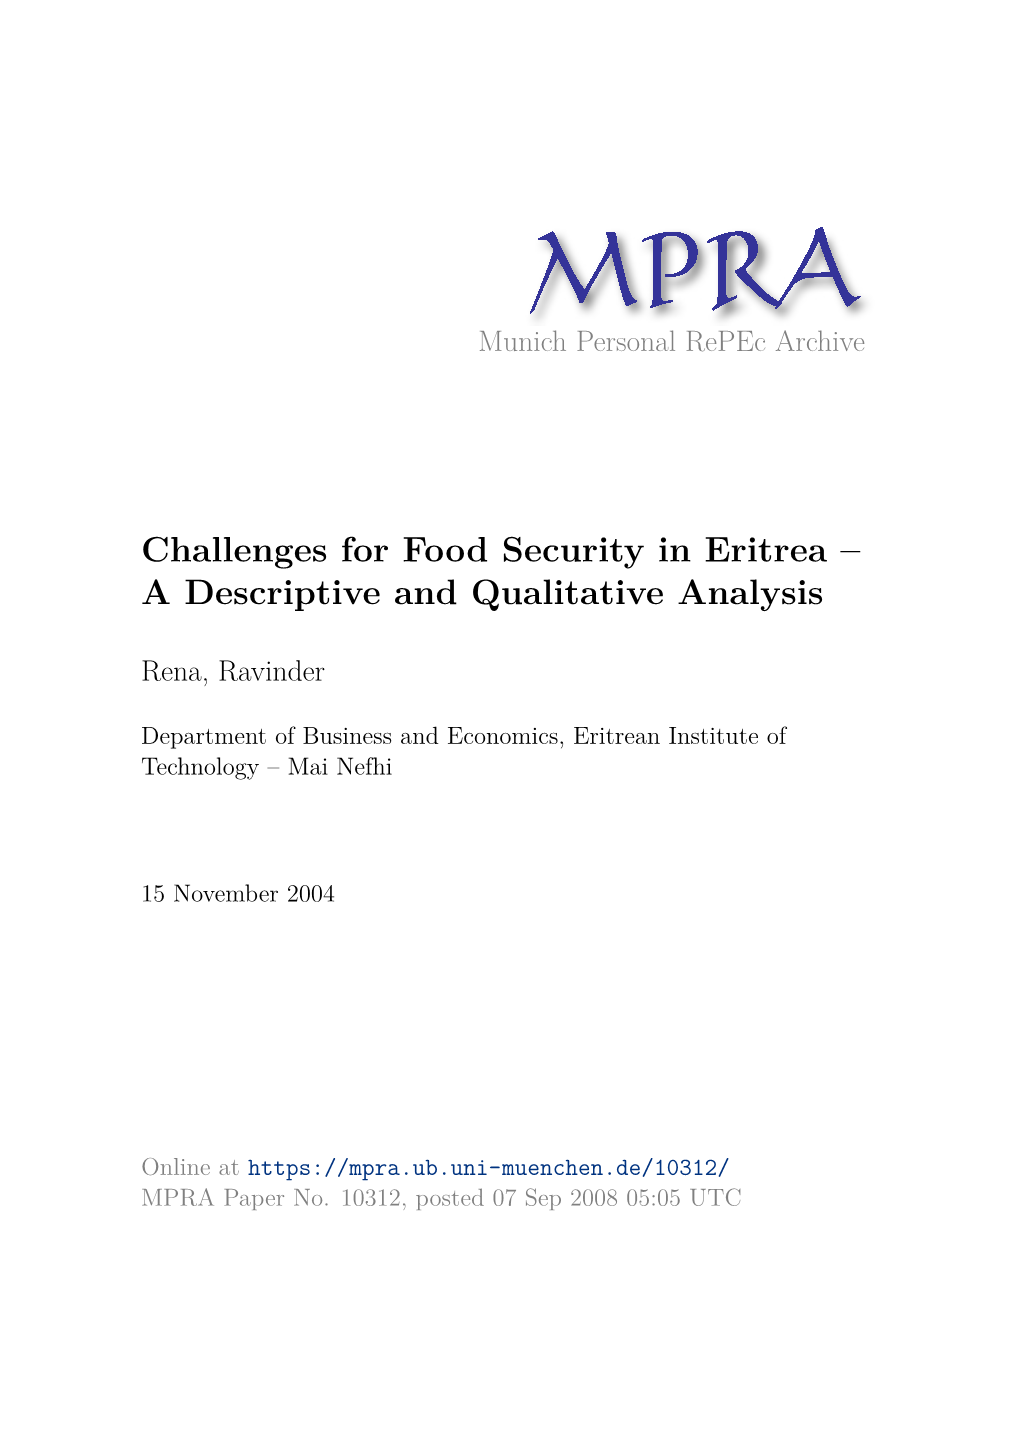 Challenges for Food Security in Eritrea – a Descriptive and Qualitative Analysis